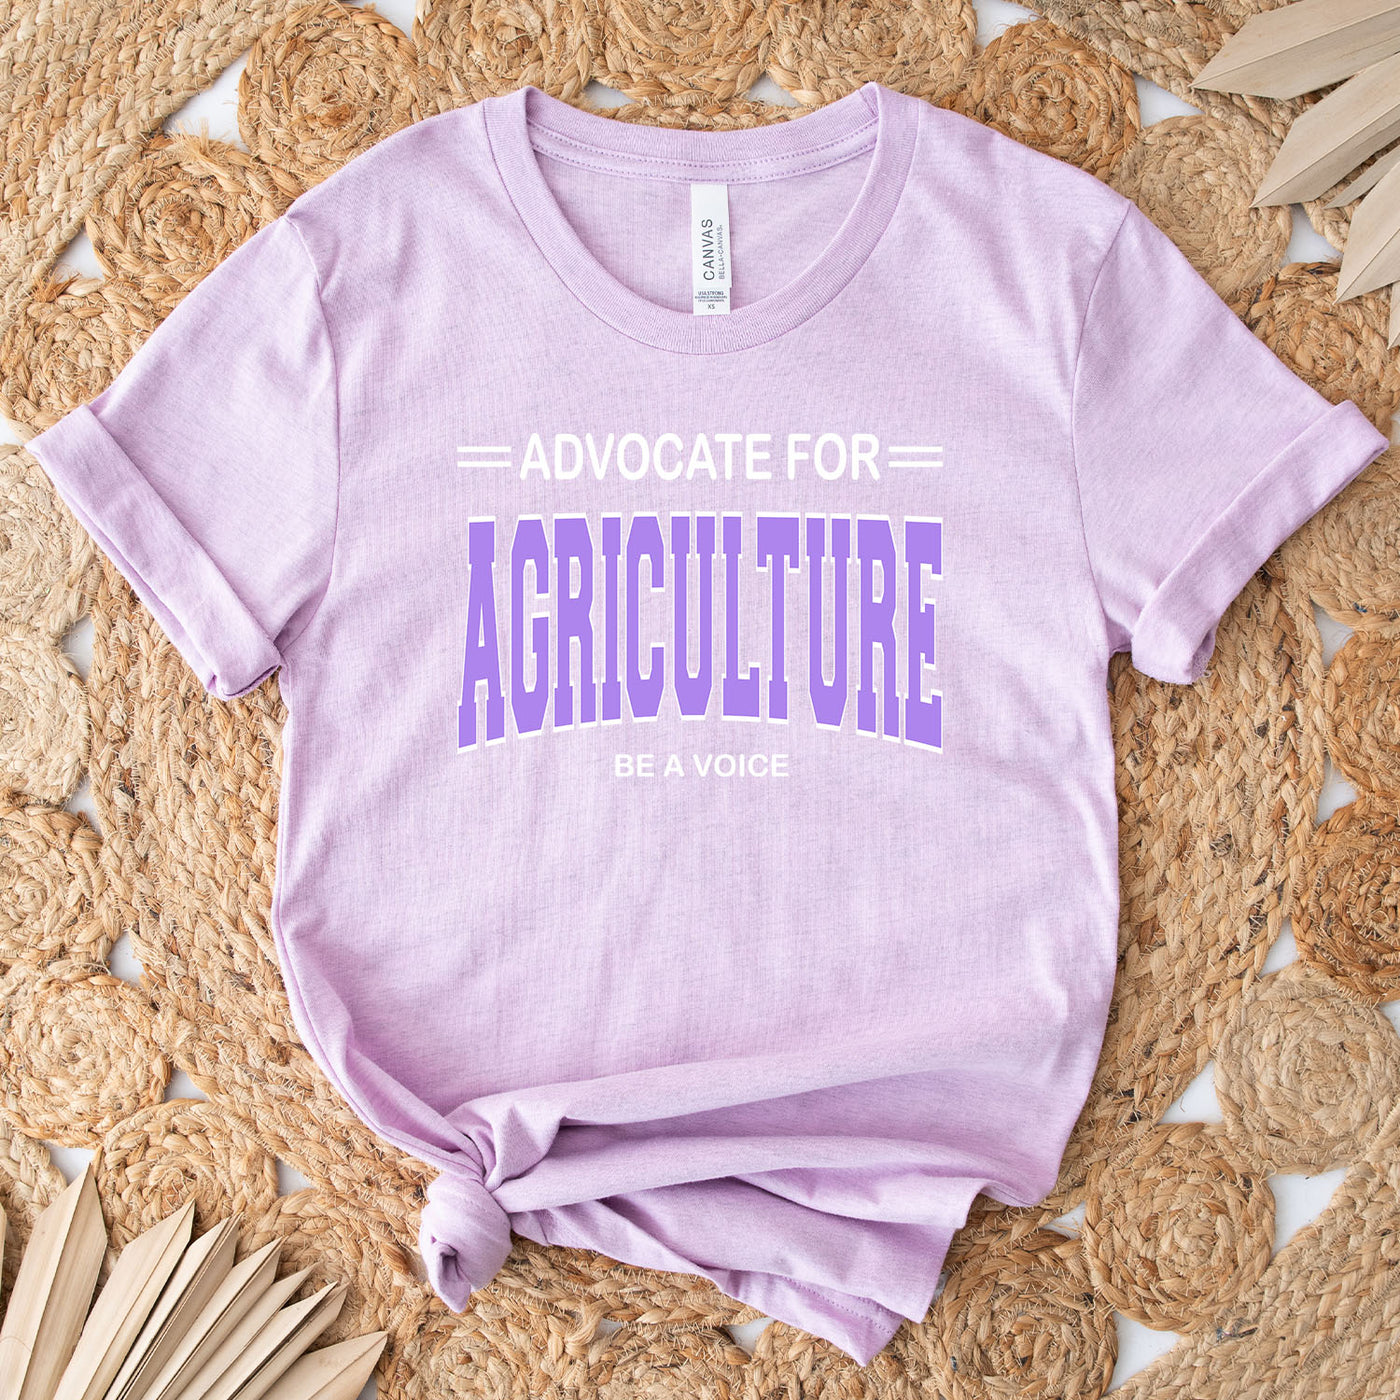 Advocate For Agriculture Be A Voice Purple Ink T-Shirt (XS-4XL) - Multiple Colors!